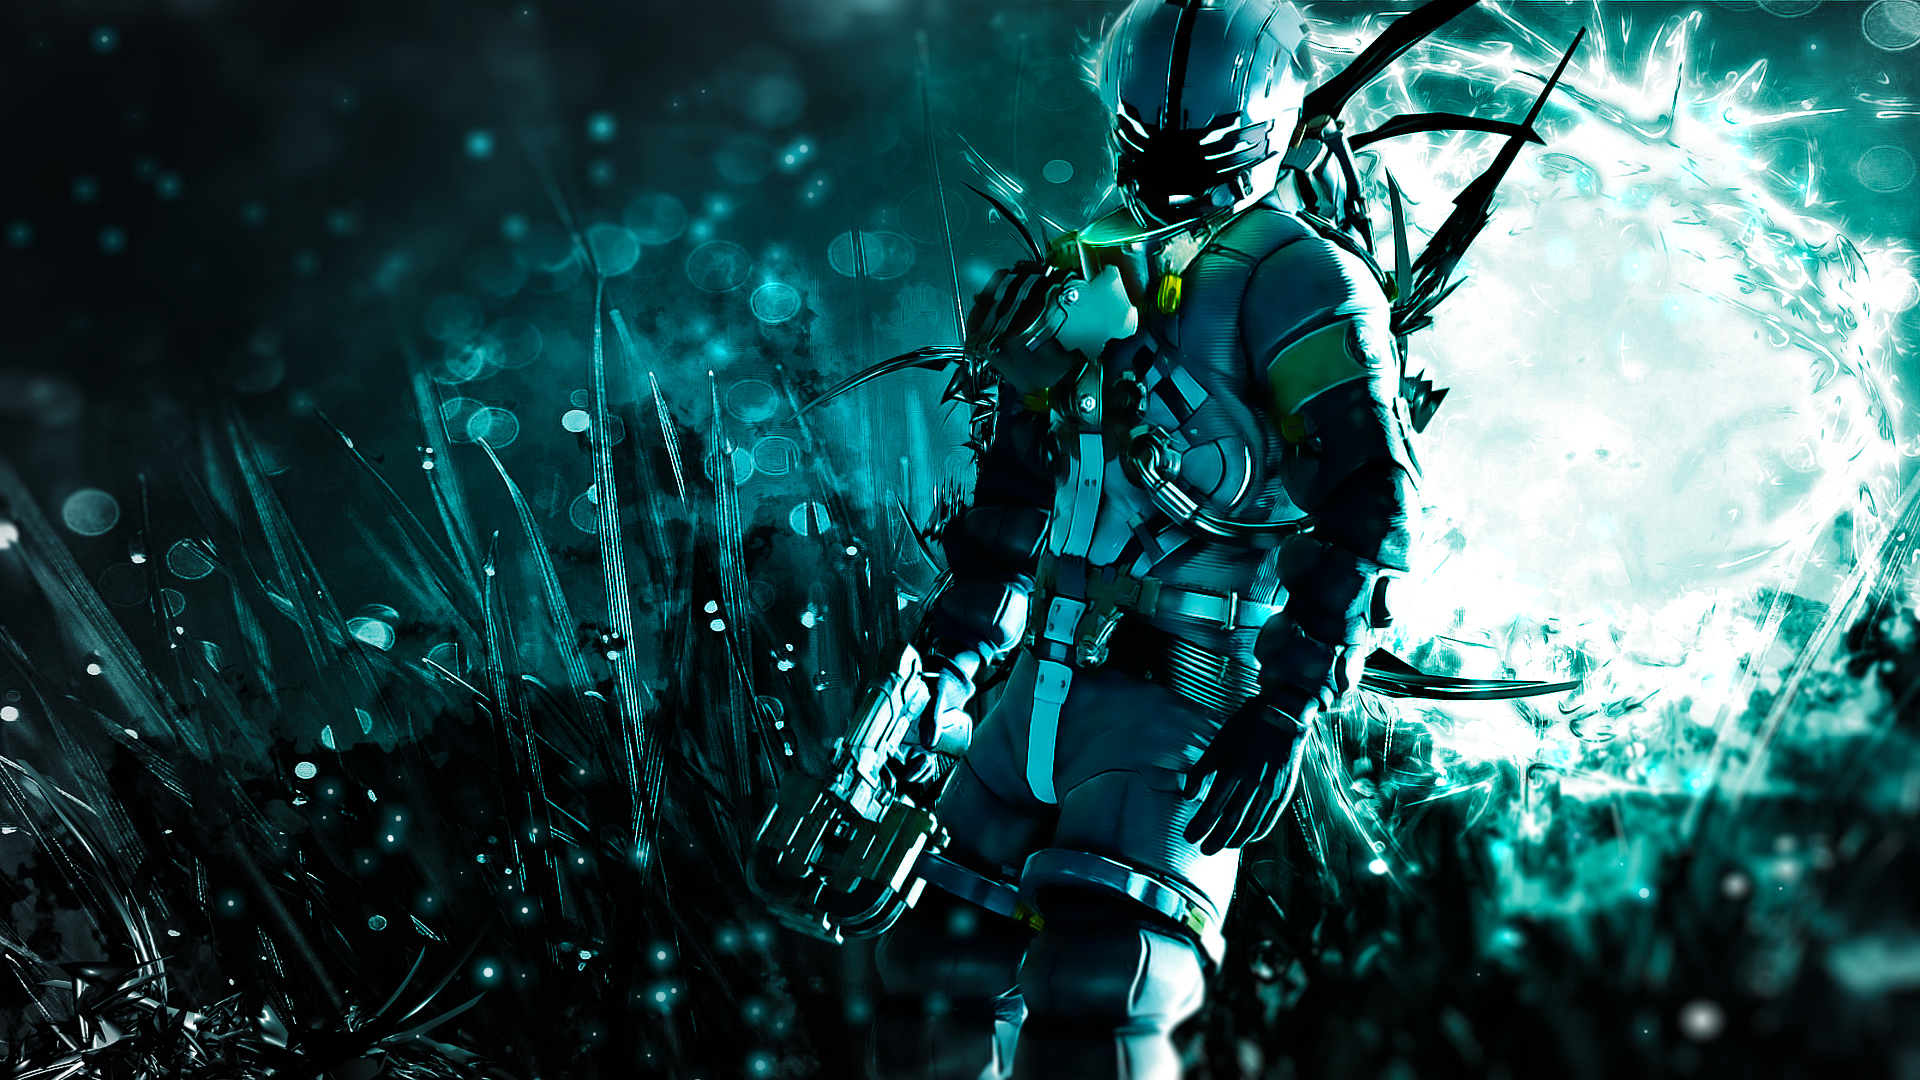 Dead space 3 nice and hd wallpapers,music,games etc